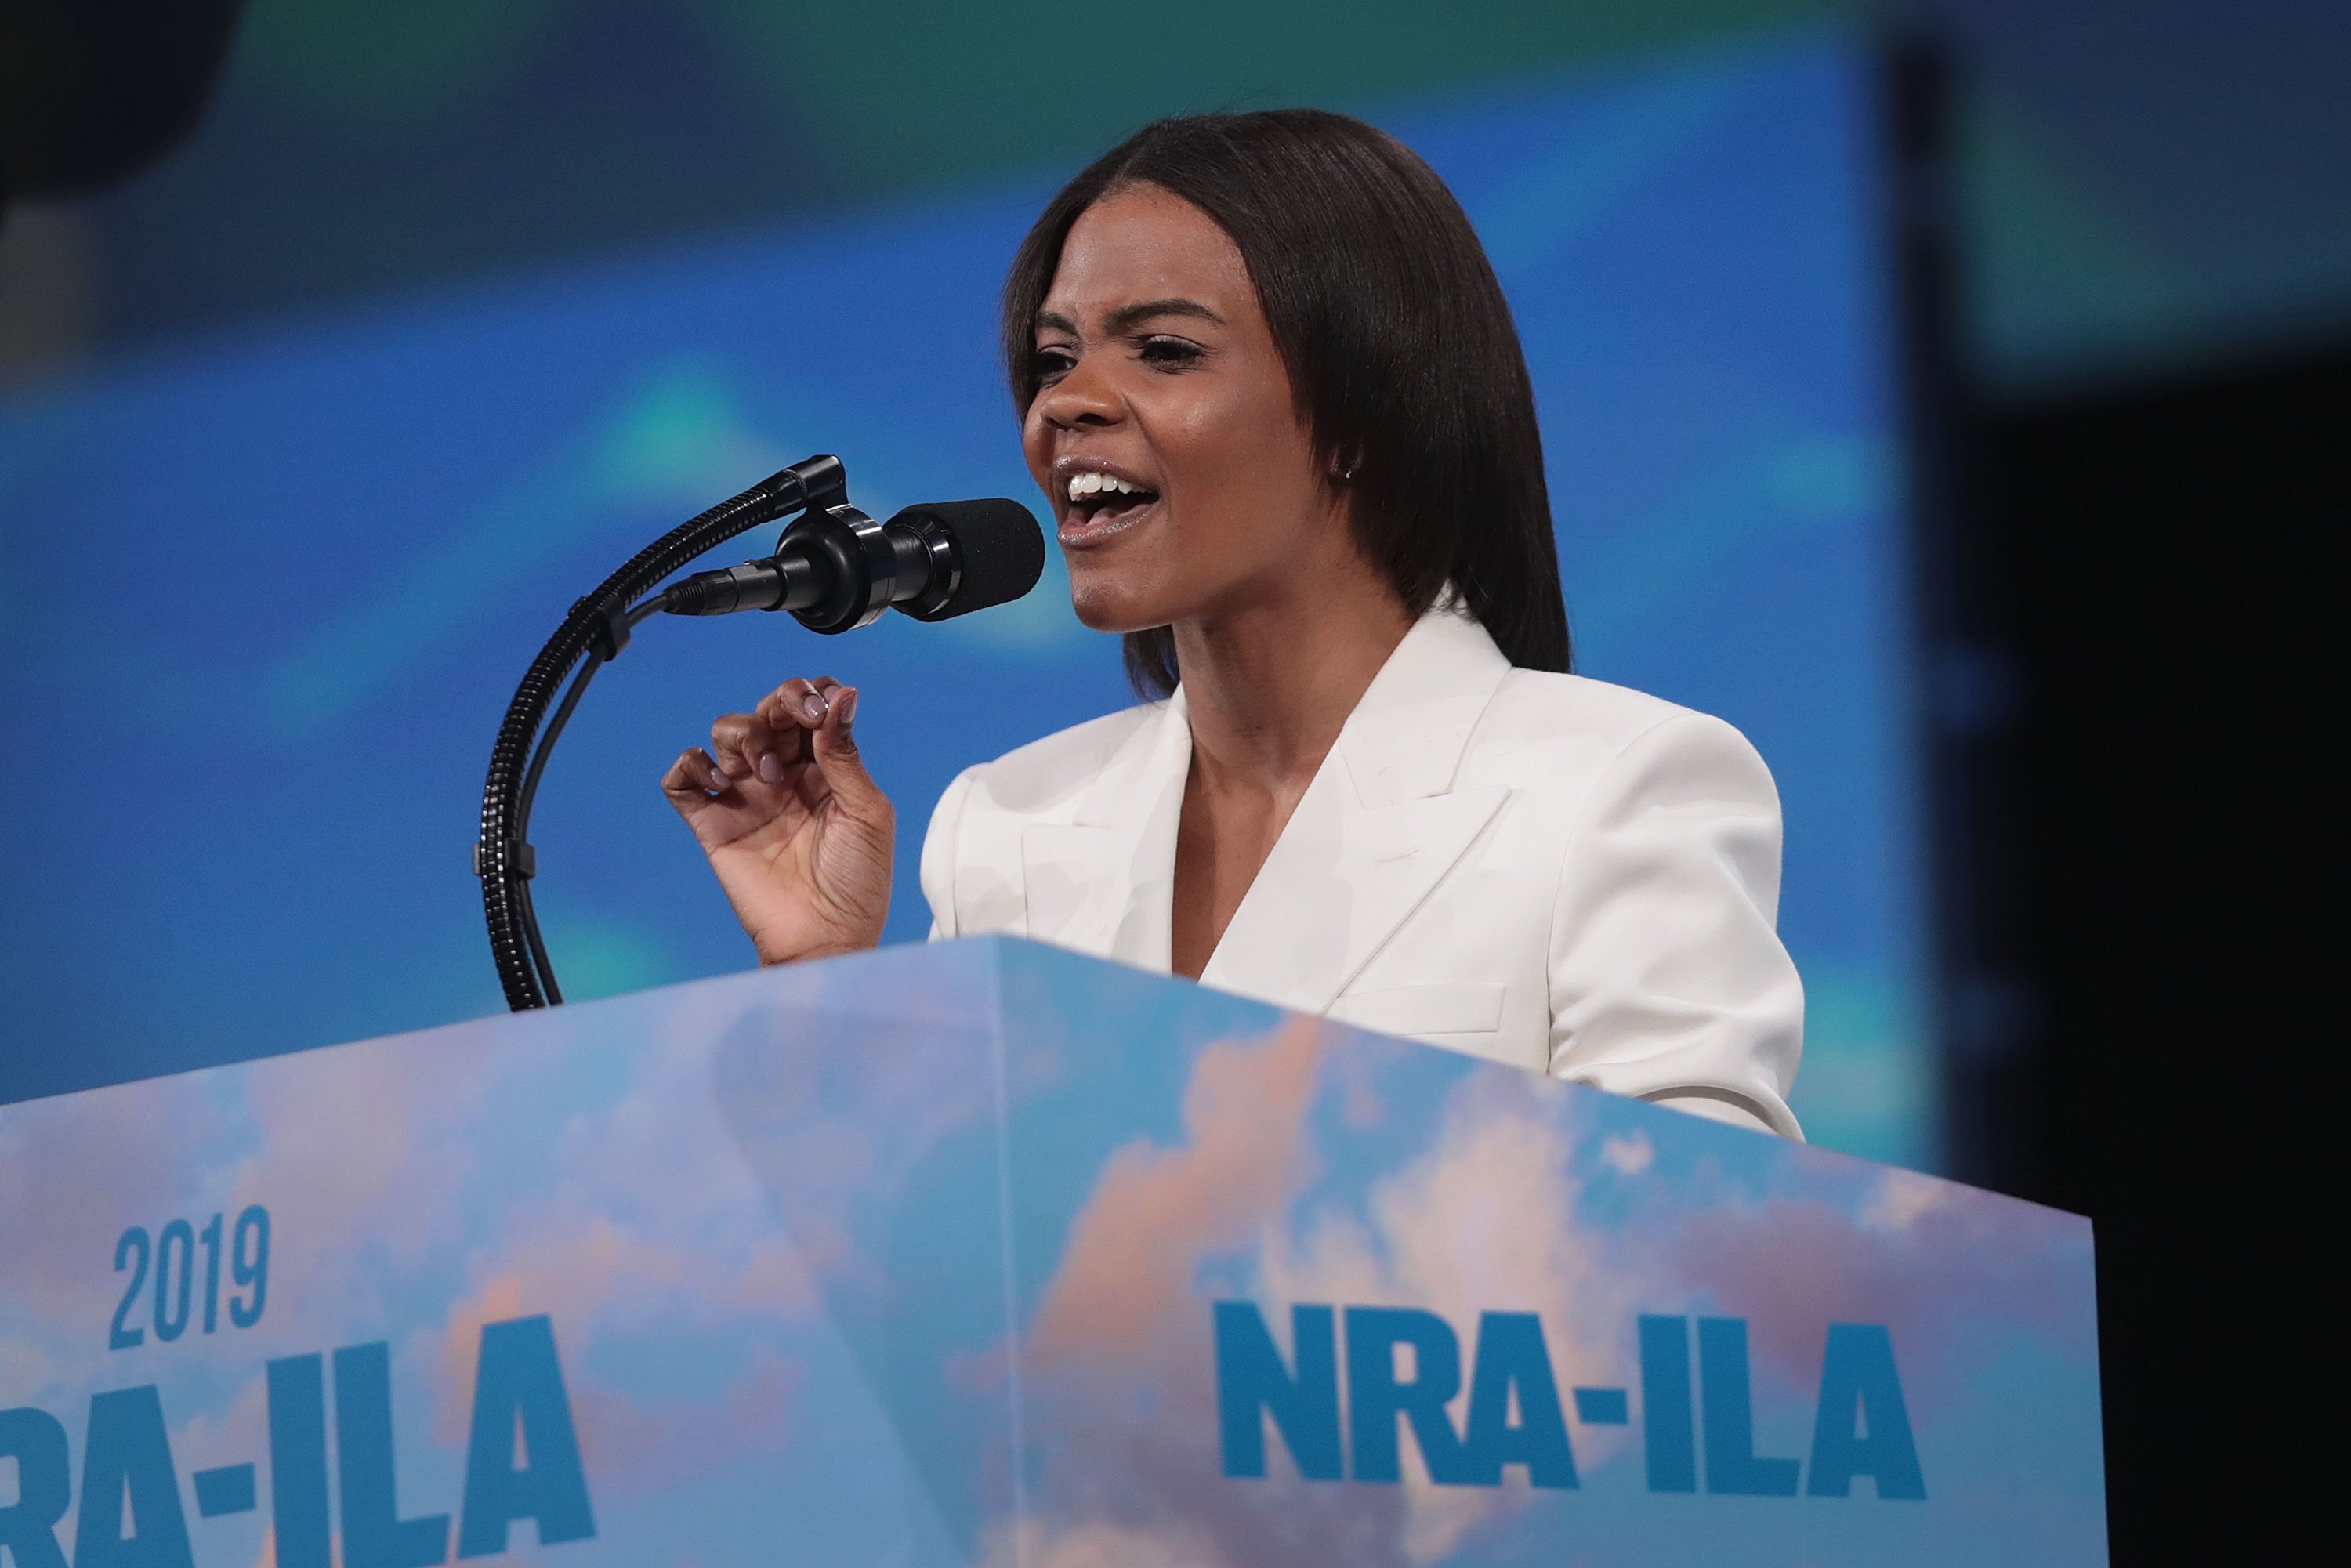 Candace Owens at the NRA Annual Meetings & Exhibits on April 26, 2019 in Indiana | Photo: Getty Images